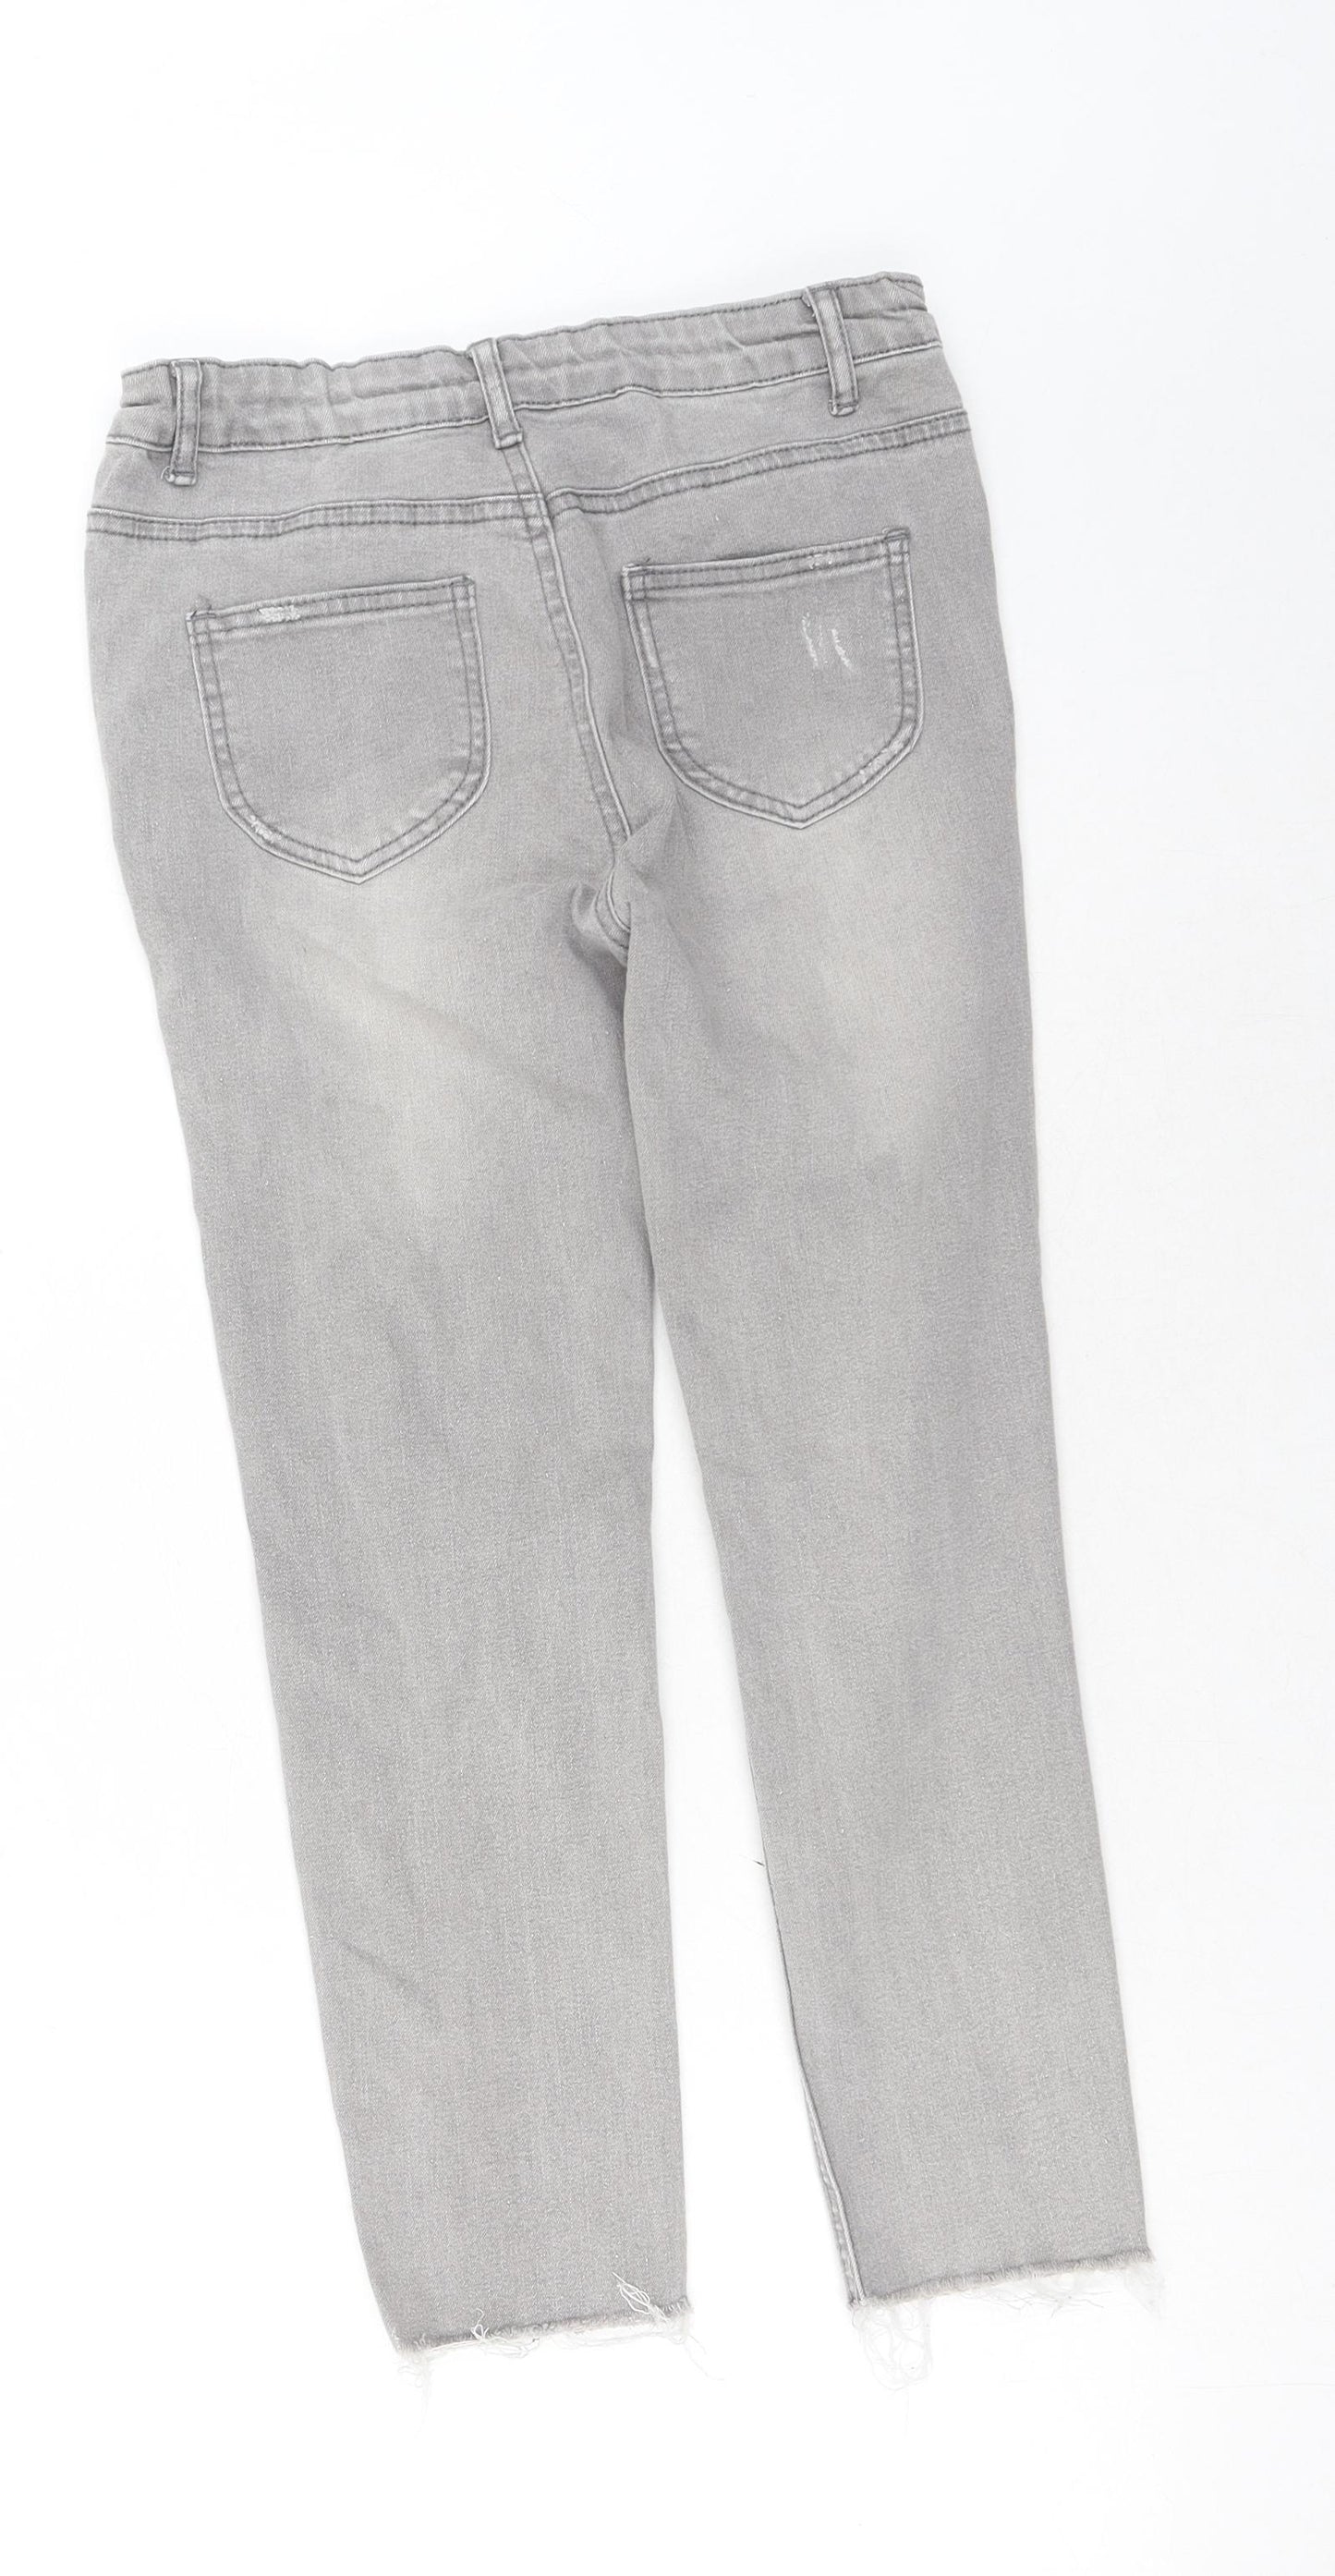 Denim & Co. Boys Grey Cotton Skinny Jeans Size 11-12 Years Regular Button - Distressed